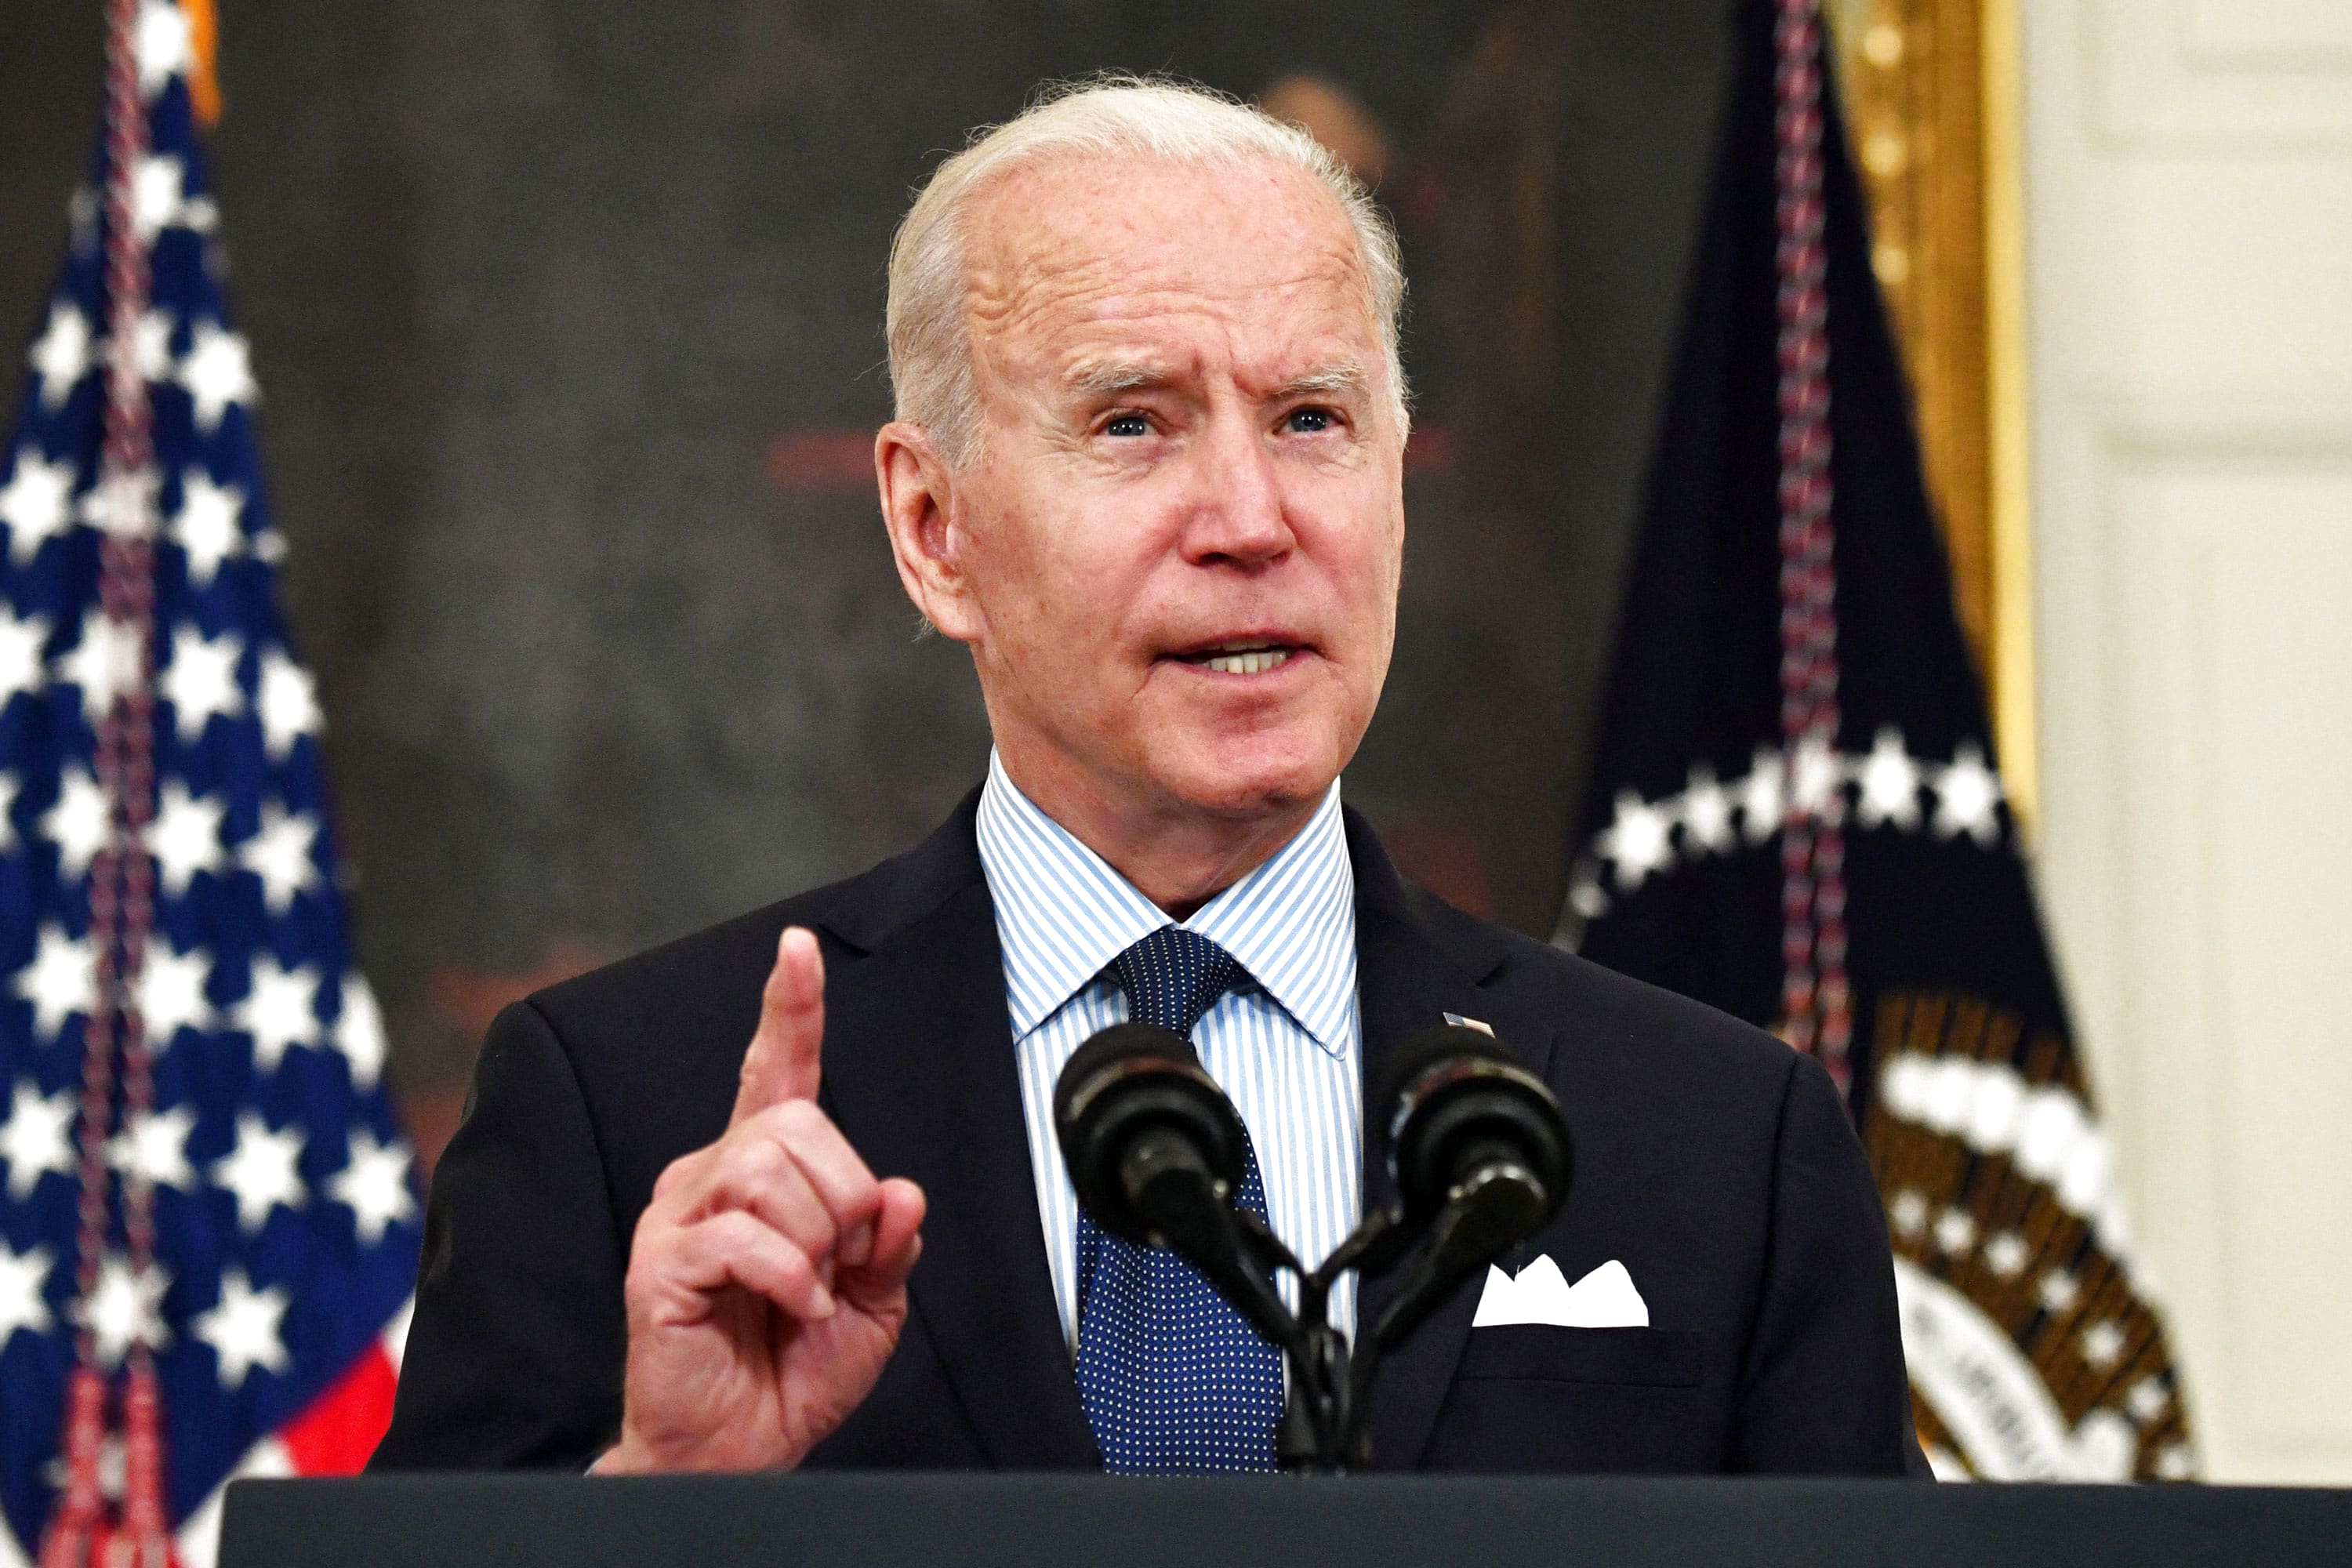 Biden's new Covid vaccination goal is for 70% of adults to have at least one shot by July 4